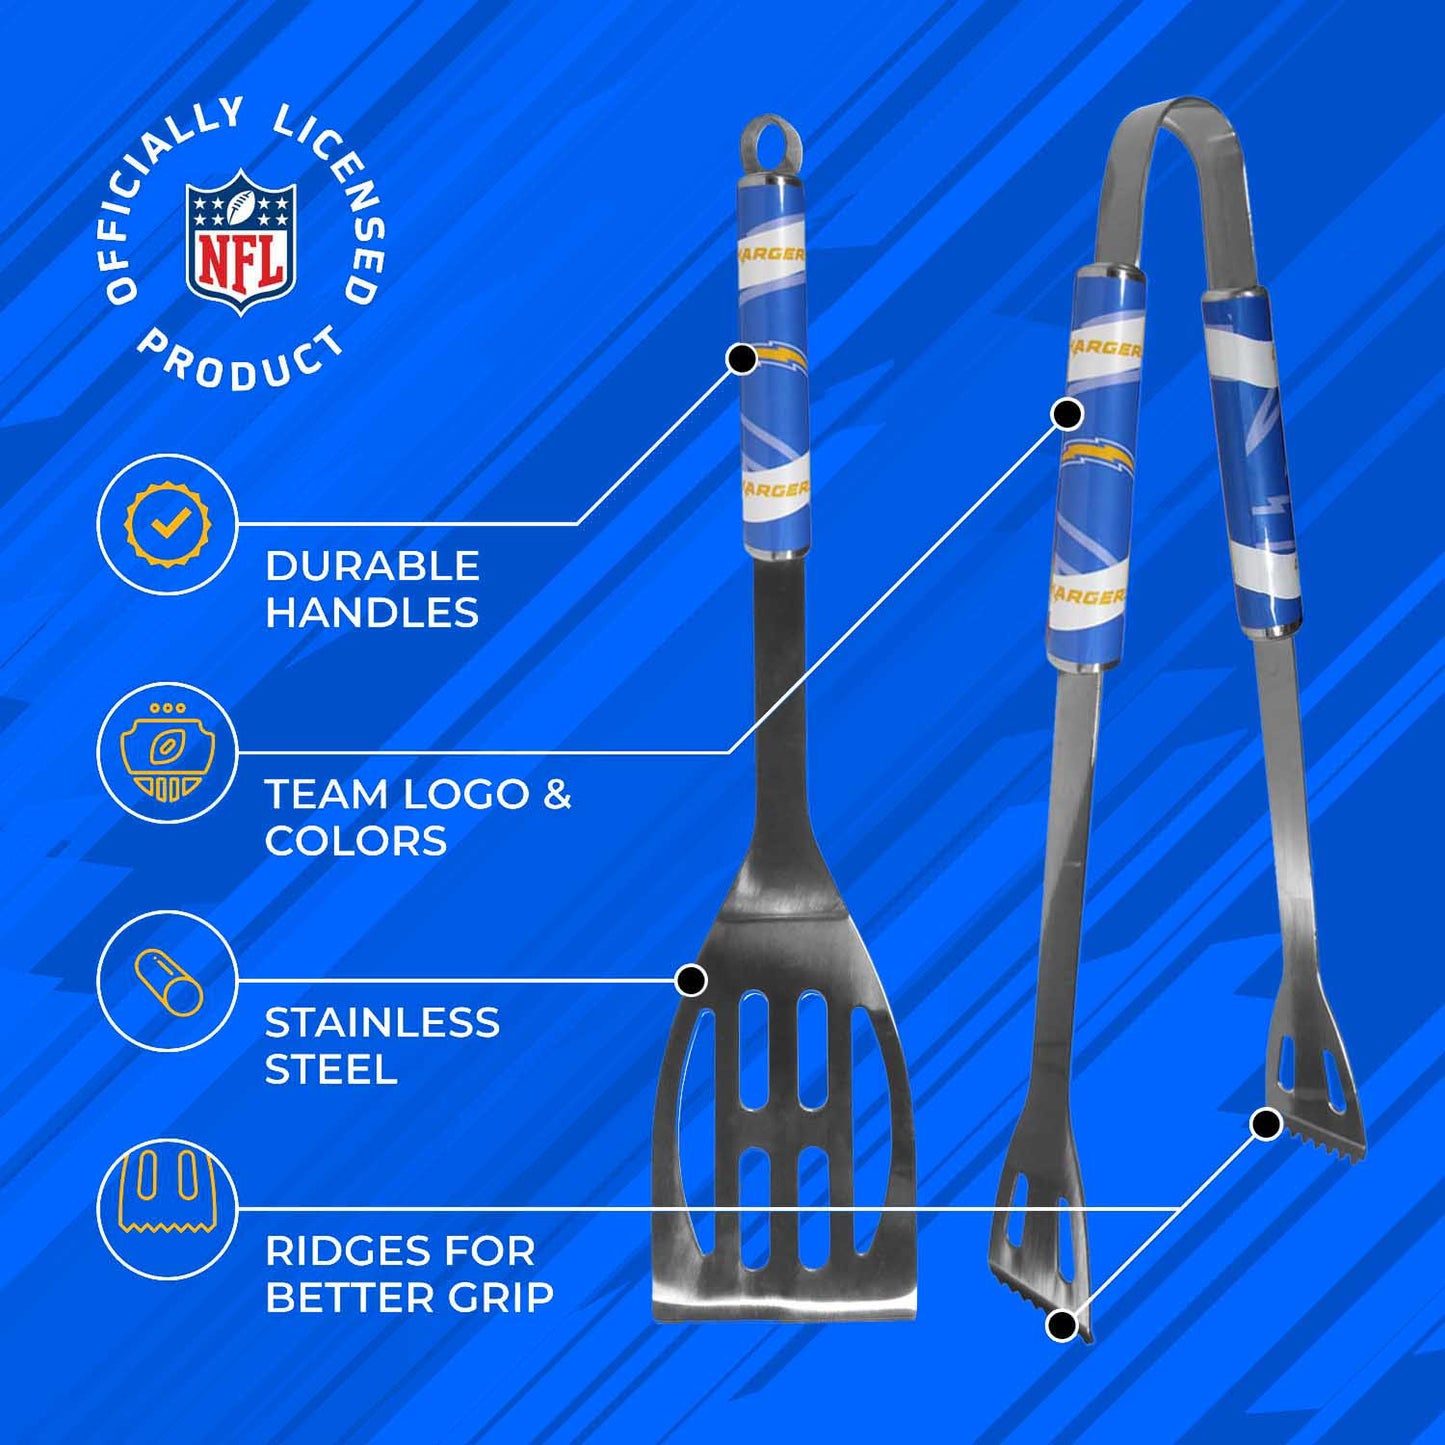 Los Angeles Chargers NFL Two Piece Grilling Tools Set with 2 Magnet Chip Clips - Chrome